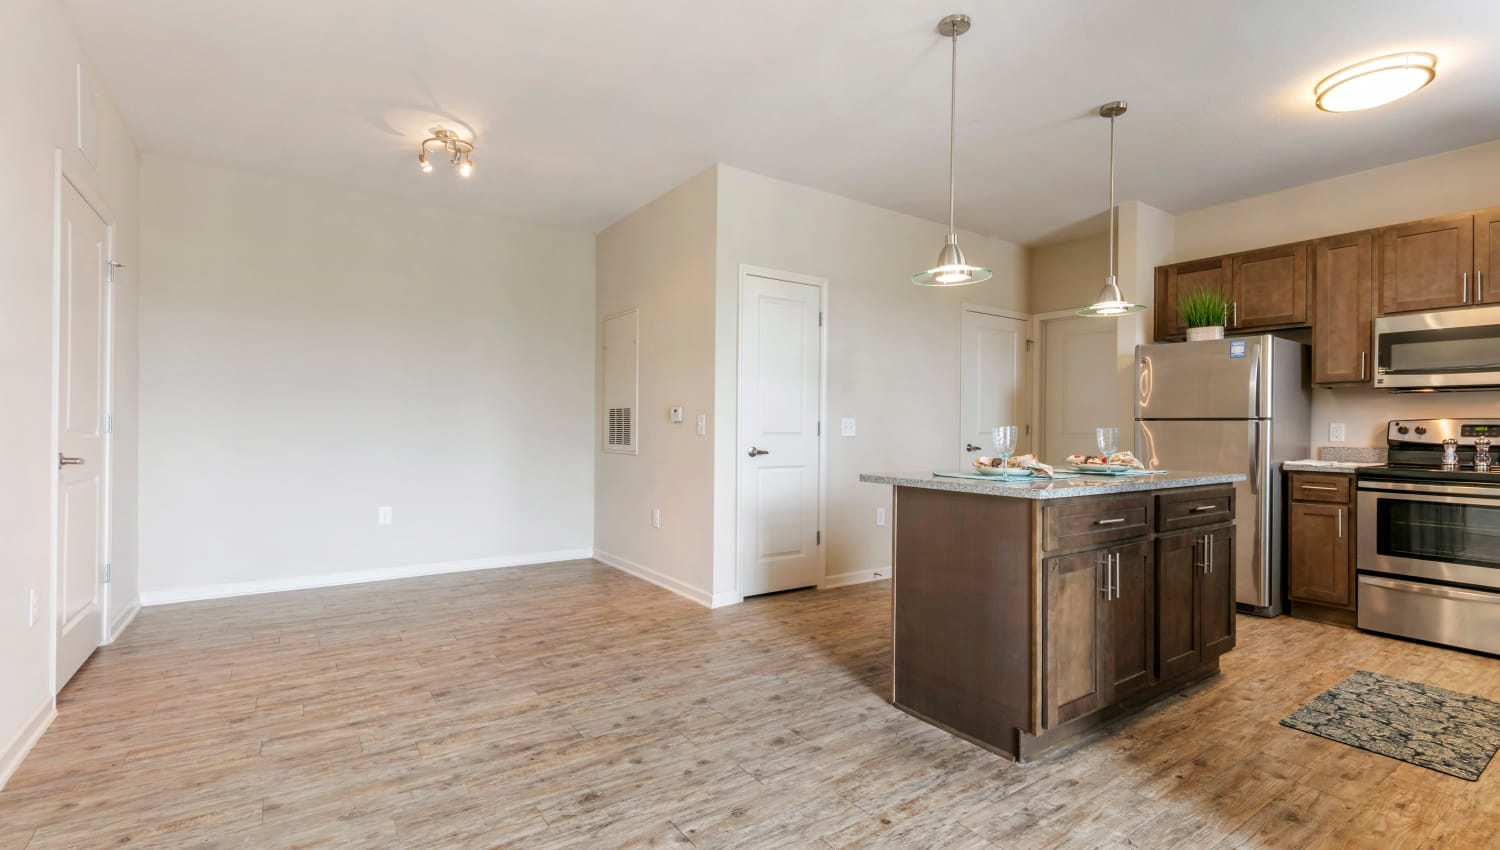 Open, modern kitchen and living room in an apartment home at The Village at Apison Pike in Ooltewah, Tennessee